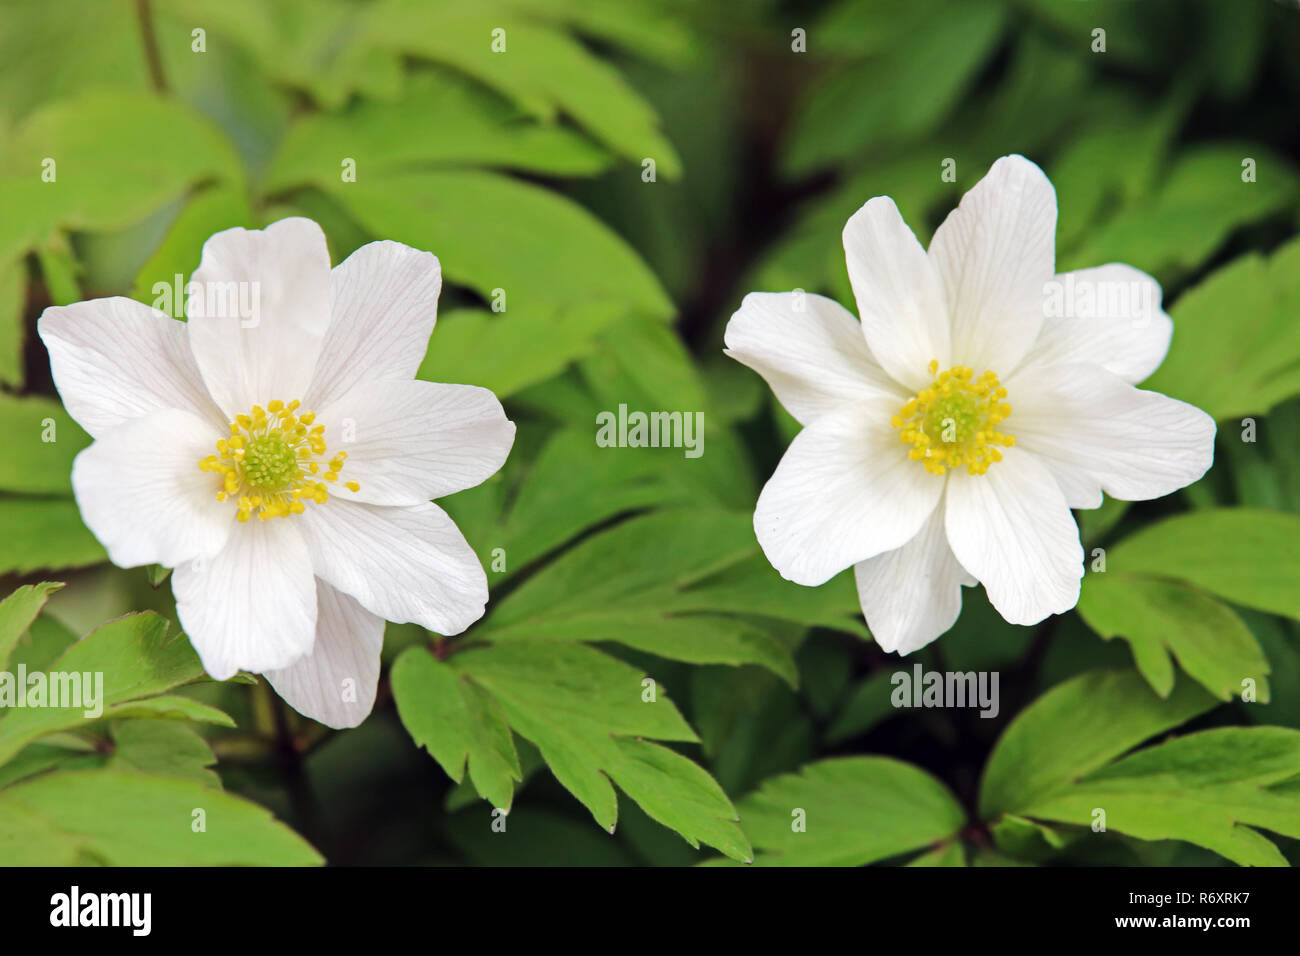 two flowers of the wood anemone anemone nemorosa in close-up view Stock Photo